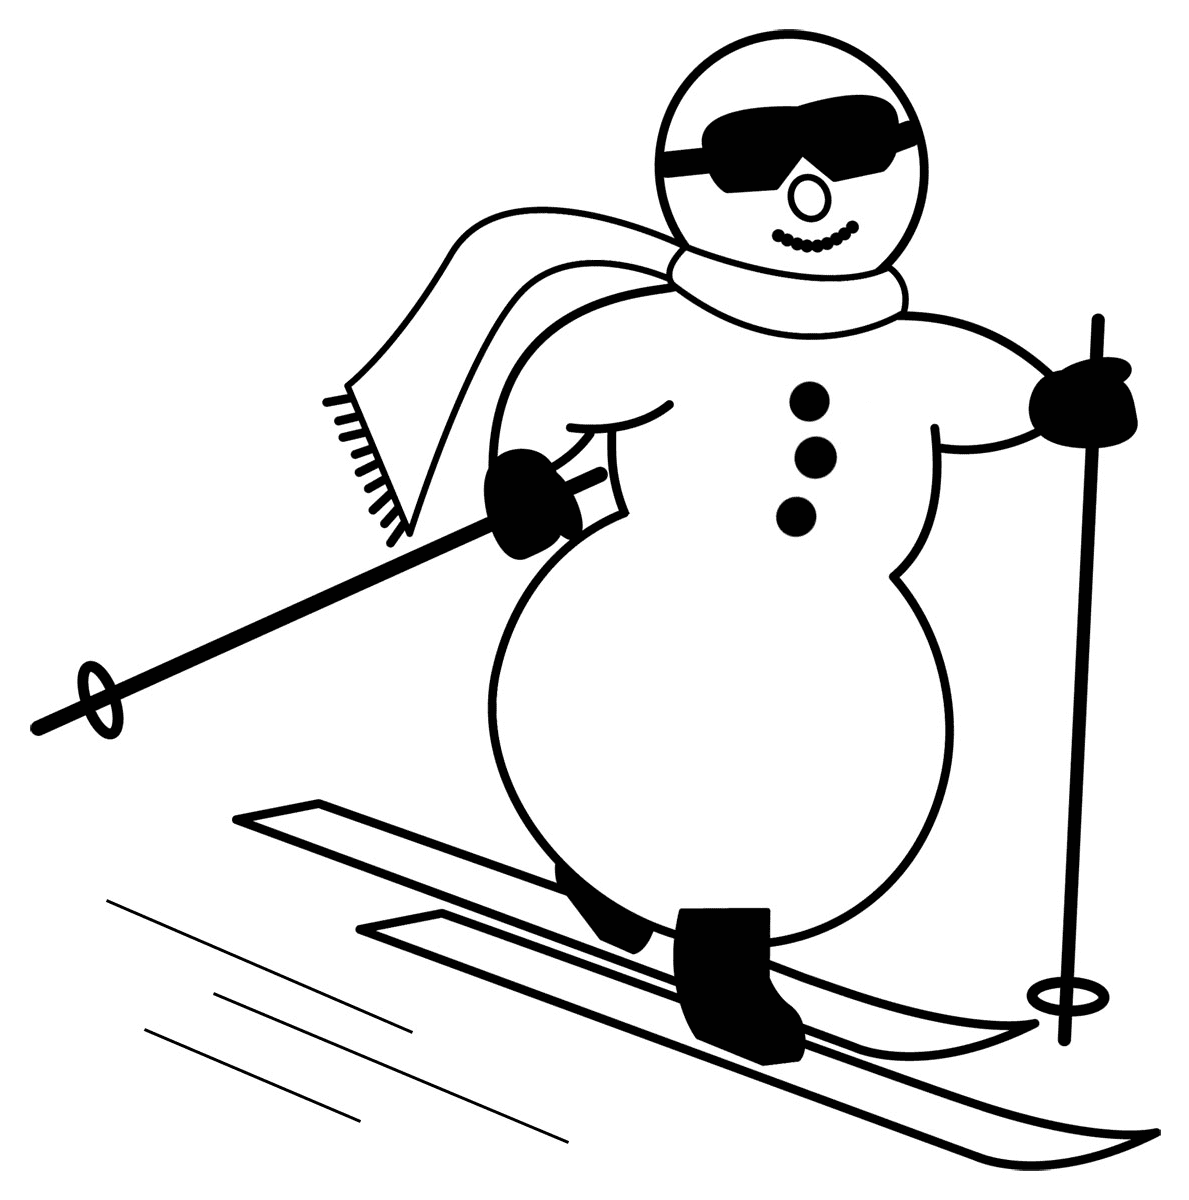 Snowman Skiing Clipart Black and White